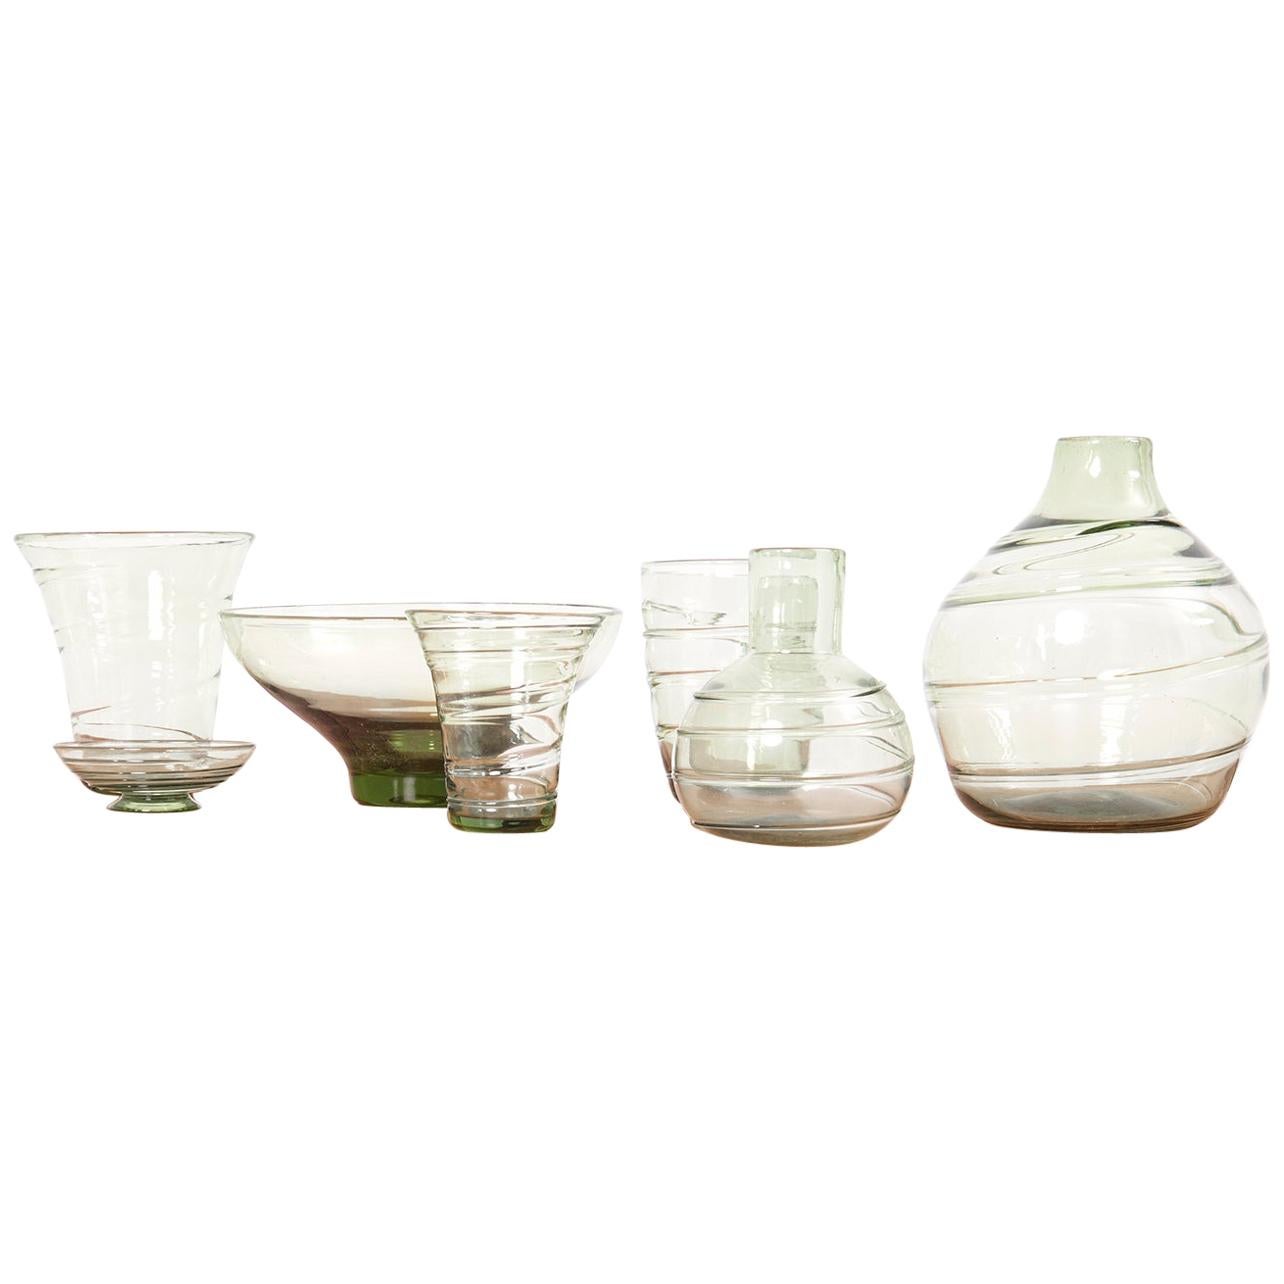 Set of 7 Ribbon-Trailed Glass Vases and Bowls by Barnaby Powell for Whitefriars For Sale